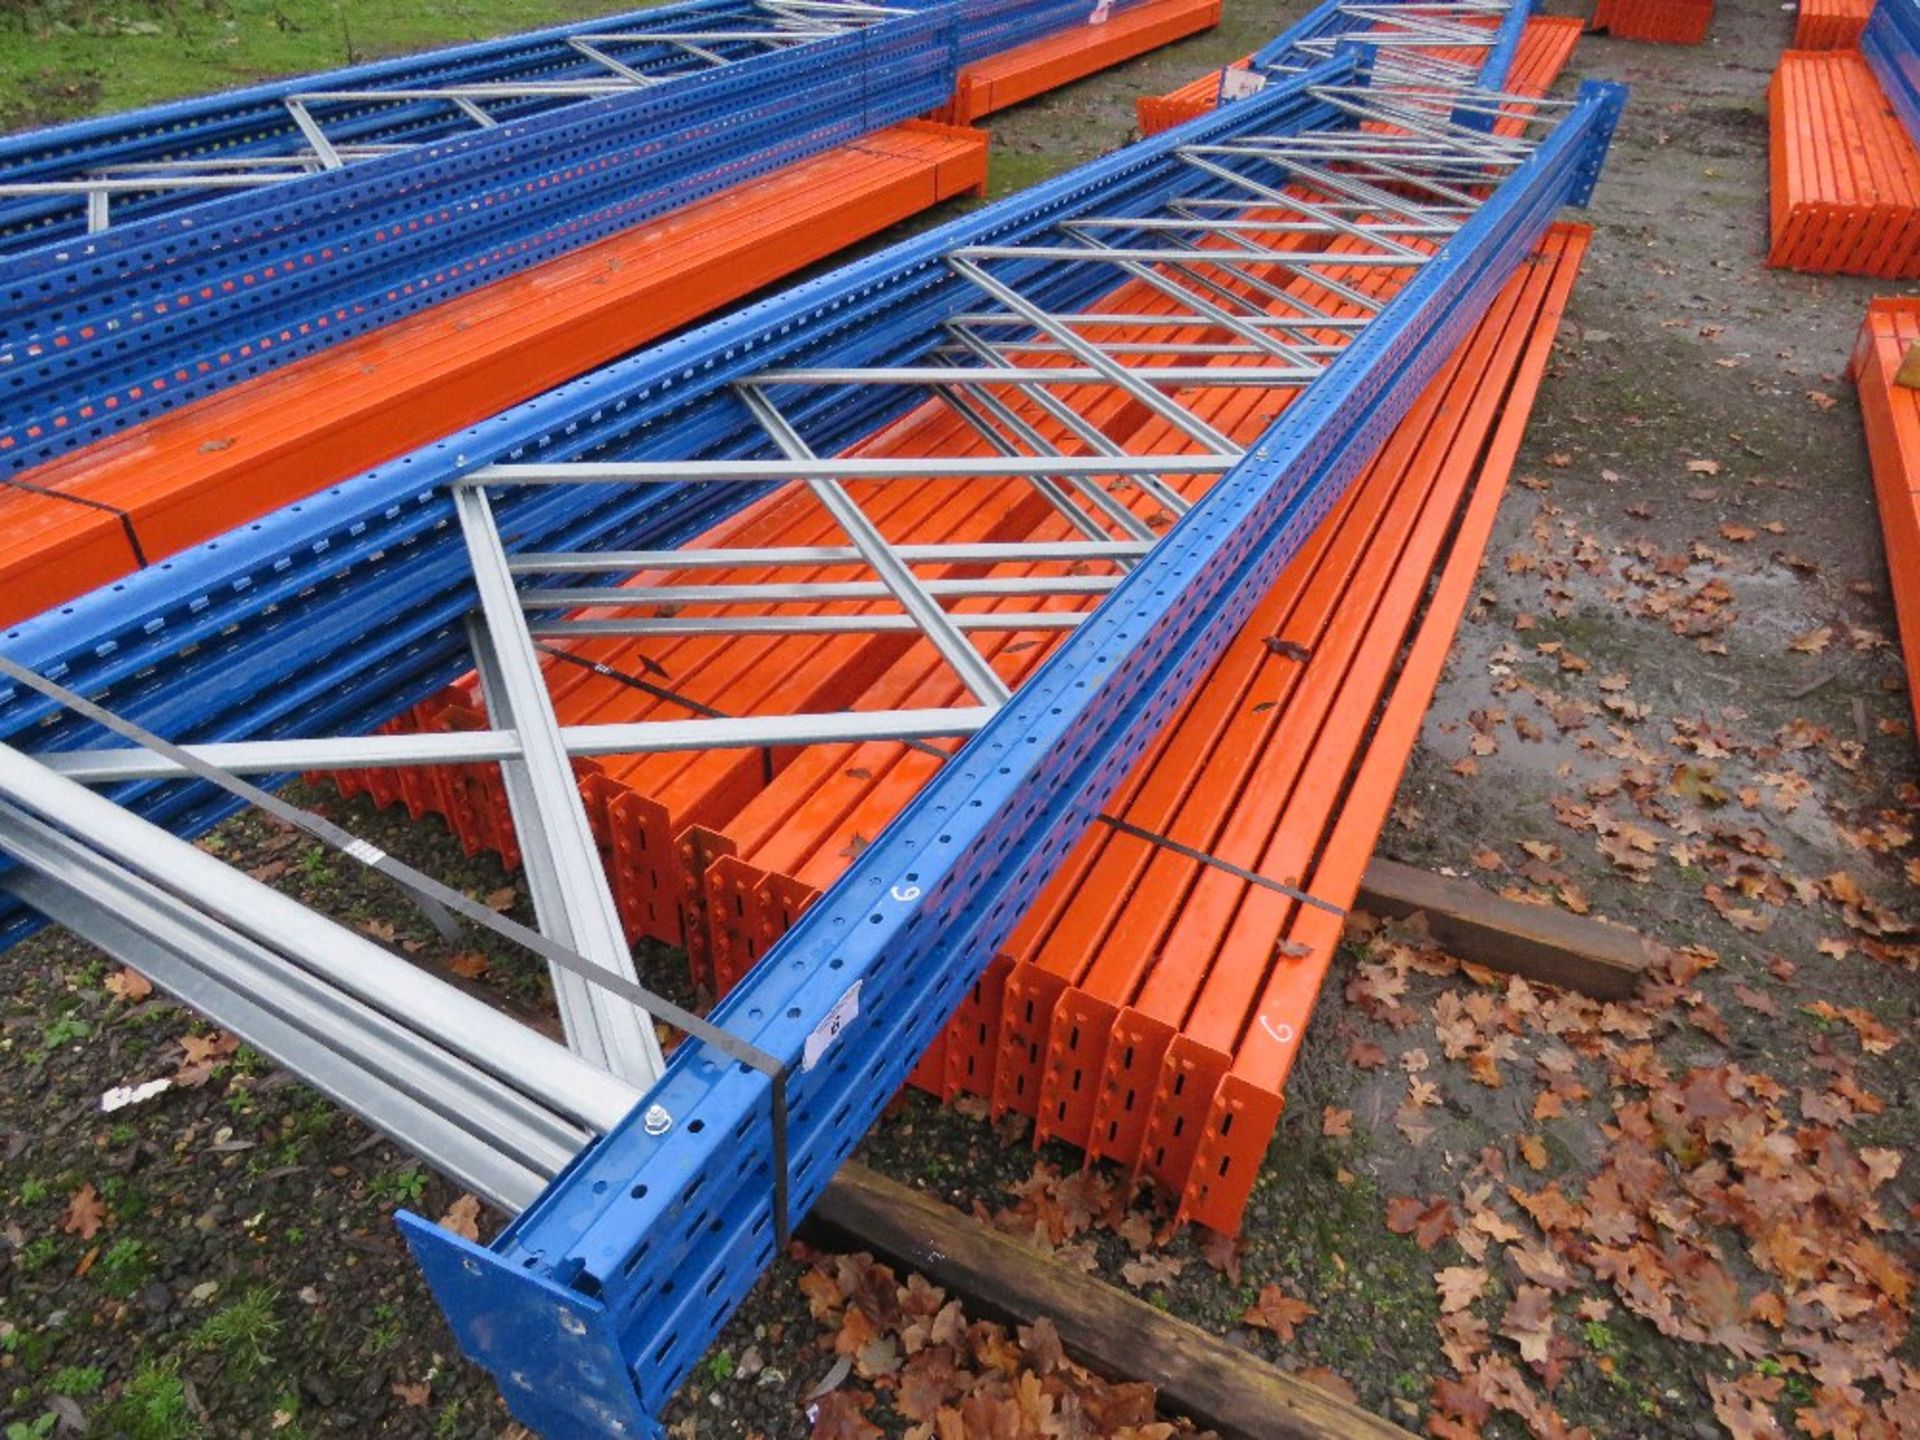 HEAVY DUTY PALLET RACKING: 5 X UPRIGHTS @ 5M HEIGHT WITH A WIDTH OF 0.9M, PLUS 24NO BEAMS @ 3.9M LEN